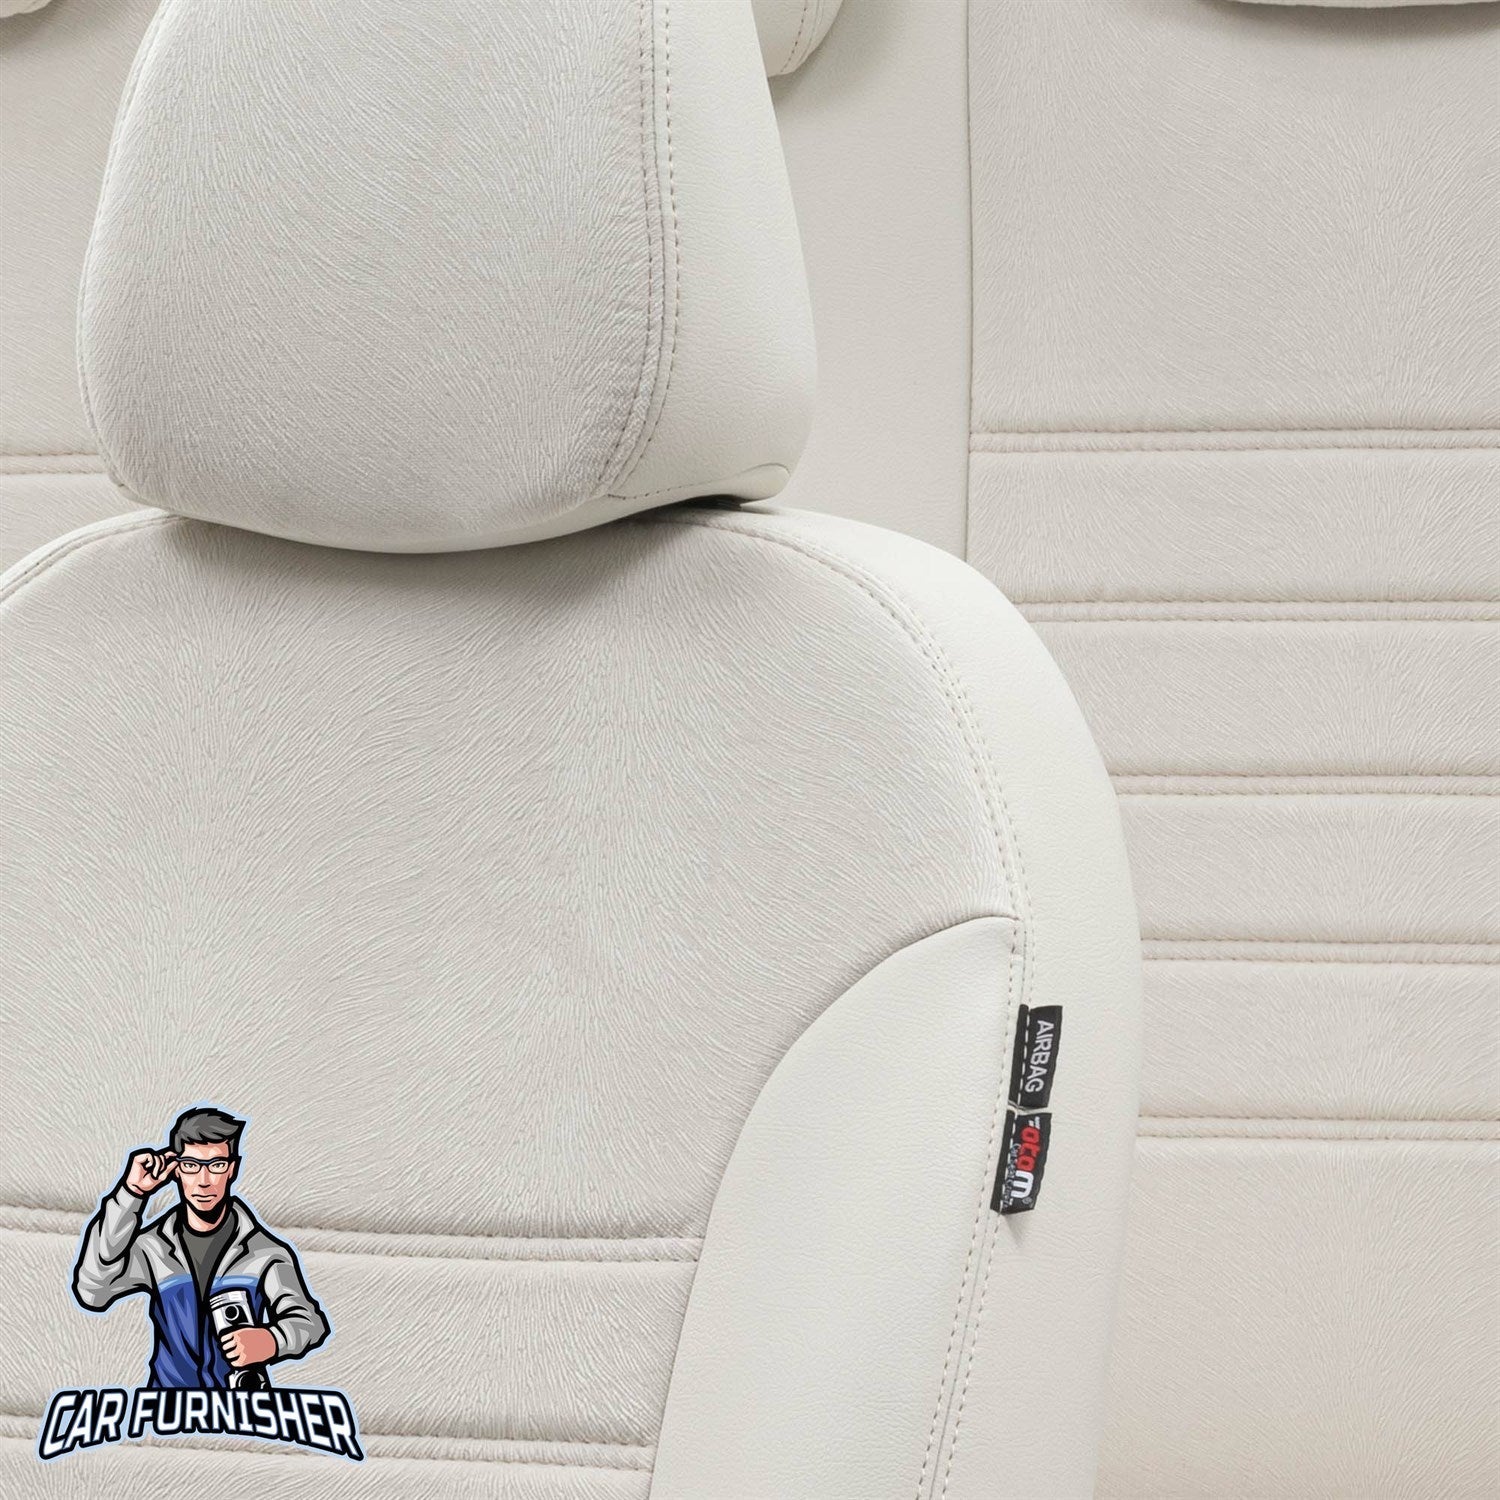 Seat Mii Seat Covers London Foal Feather Design Ivory Leather & Foal Feather